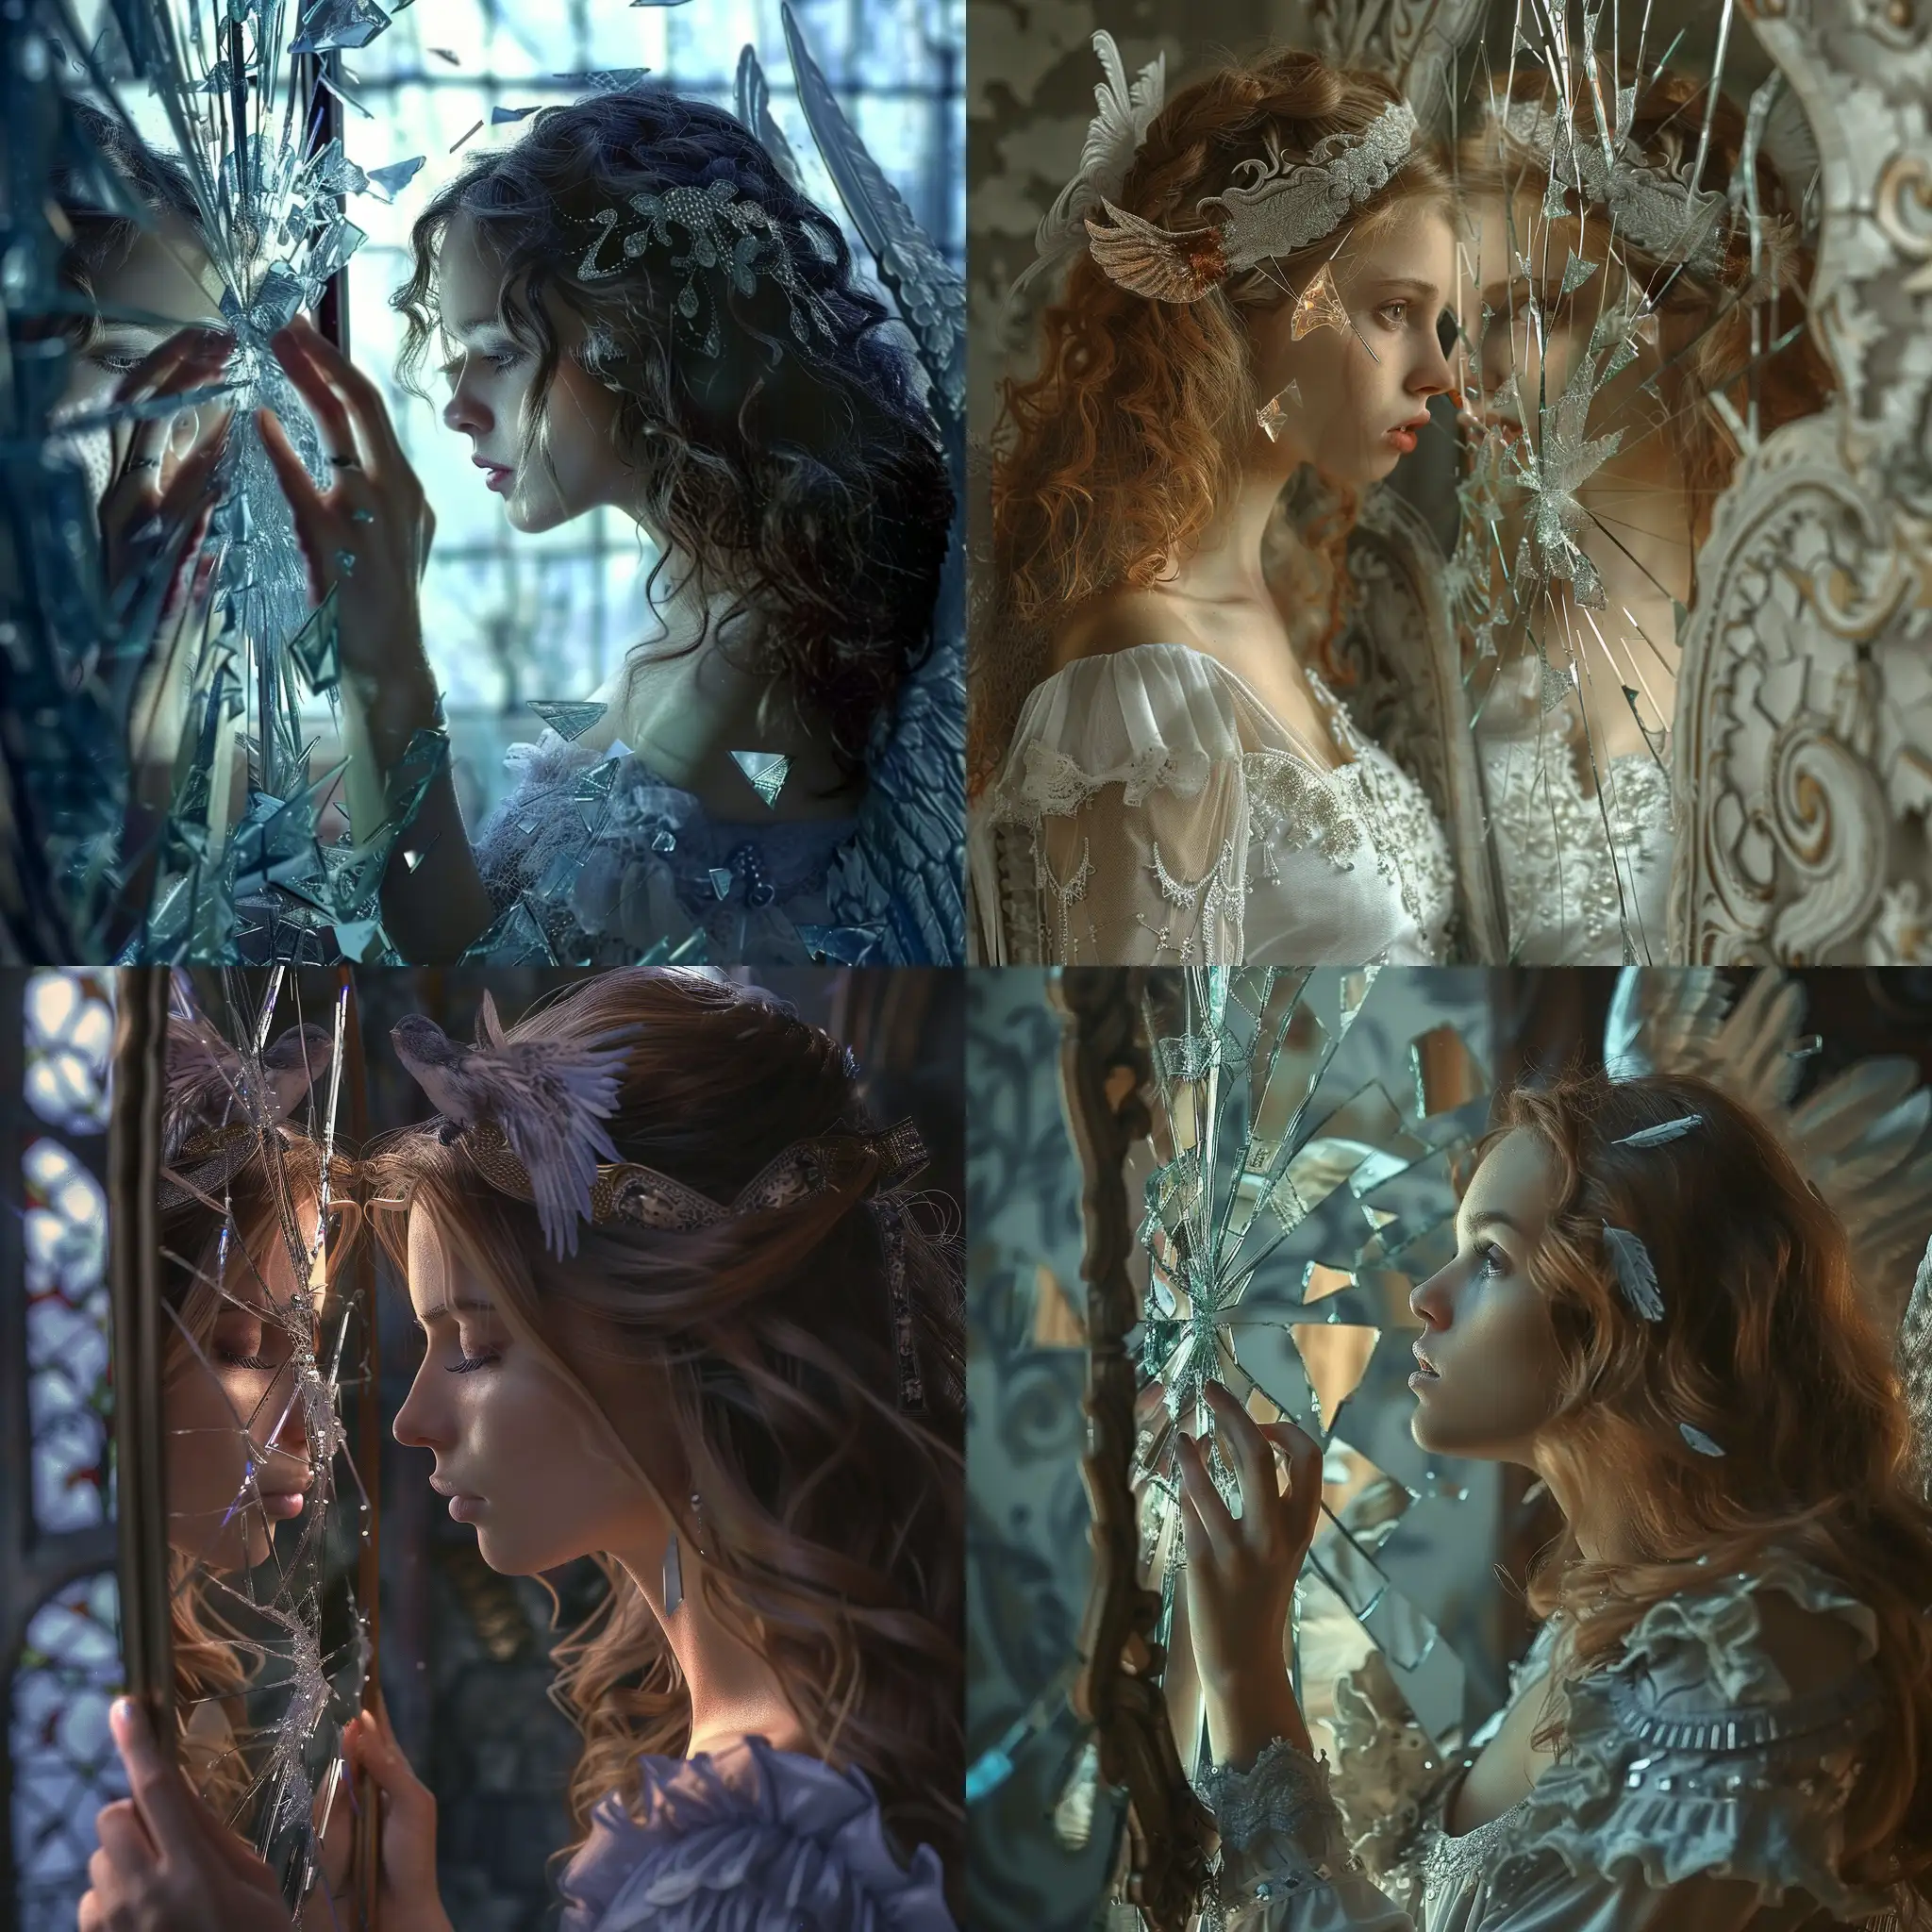 Ethereal-Medieval-Angel-Gazing-into-Shattered-Mirror-Magical-Fantasy-Art